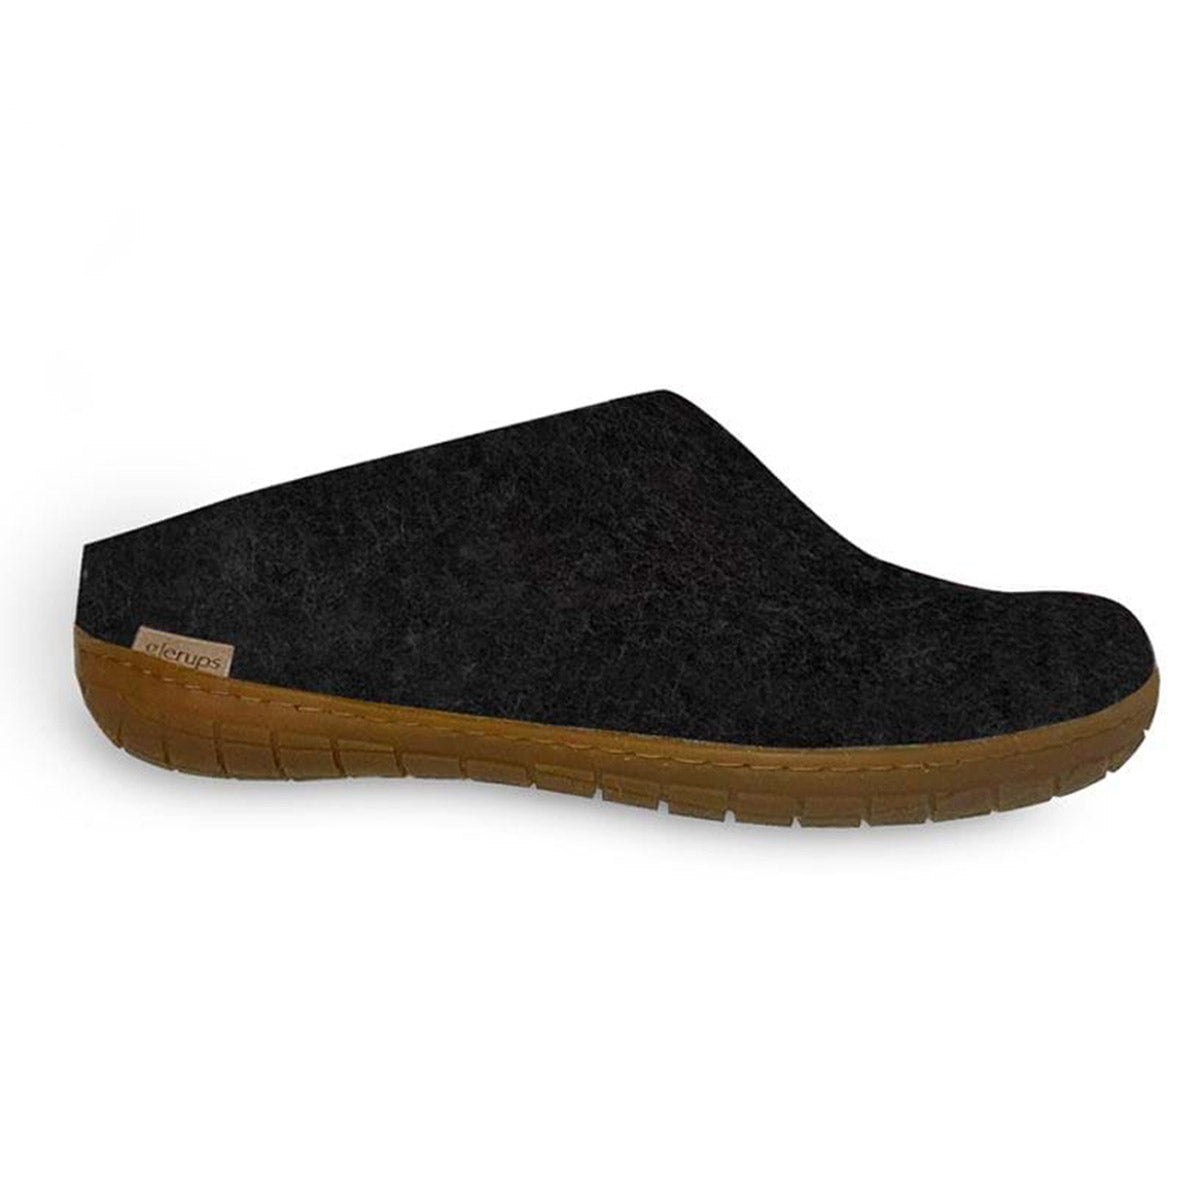 Black clog-style GLERUPS THE SLIP-ON RUBBER HONEY CHARCOAL slipper with a rubber sole.